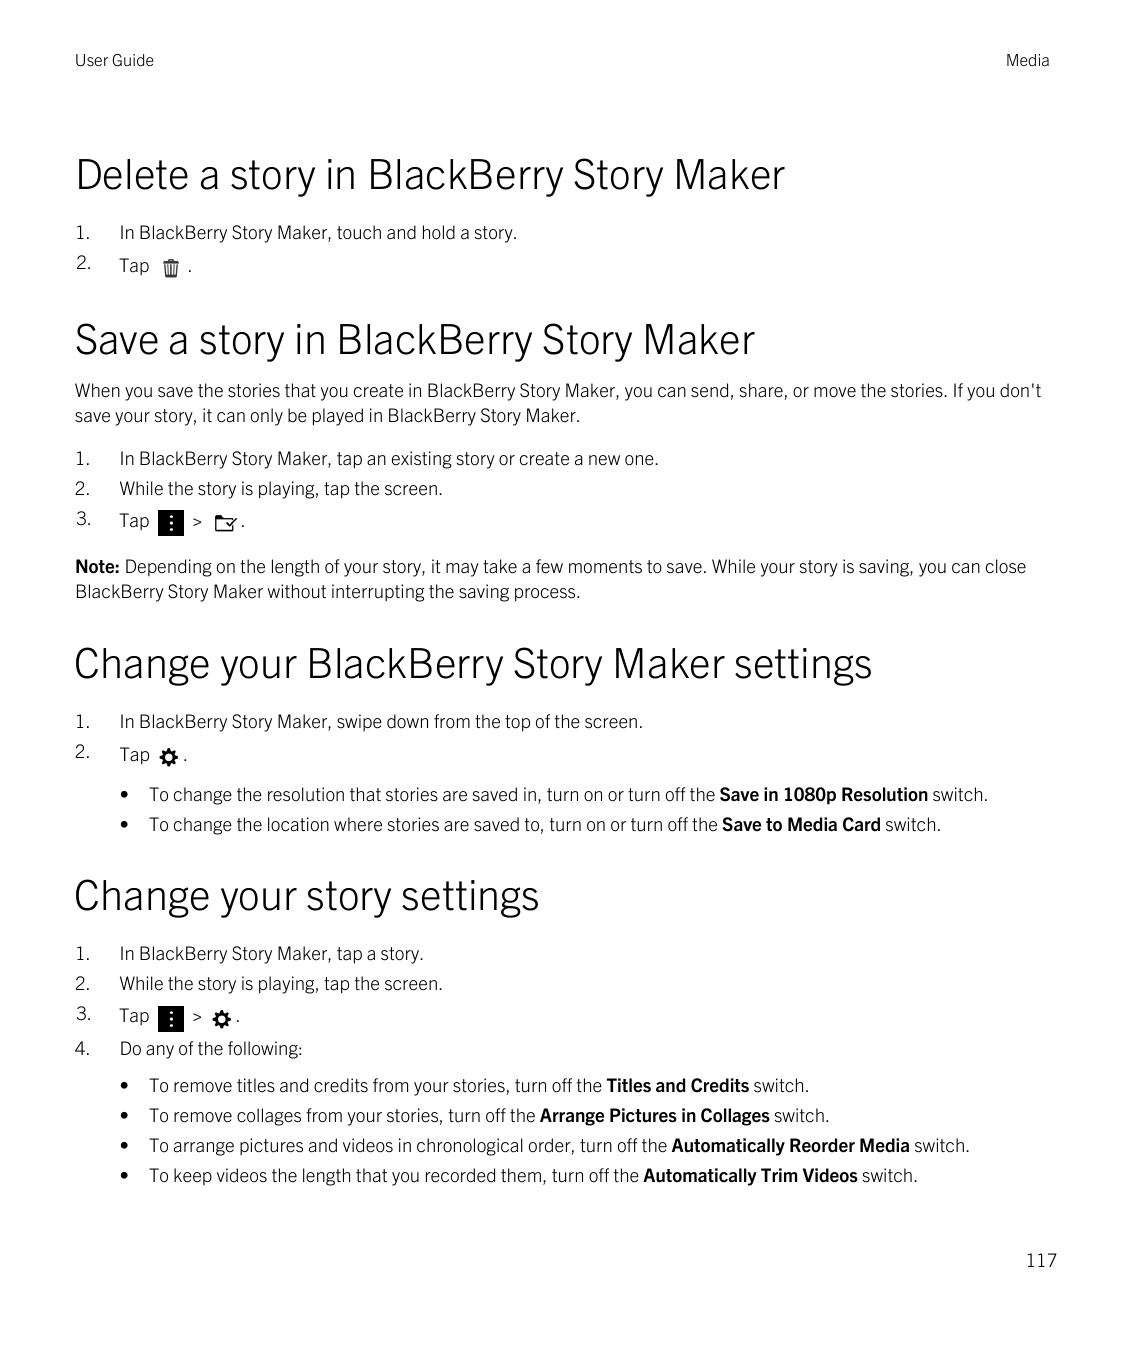 User GuideMediaDelete a story in BlackBerry Story Maker1.In BlackBerry Story Maker, touch and hold a story.2.Tap.Save a story in